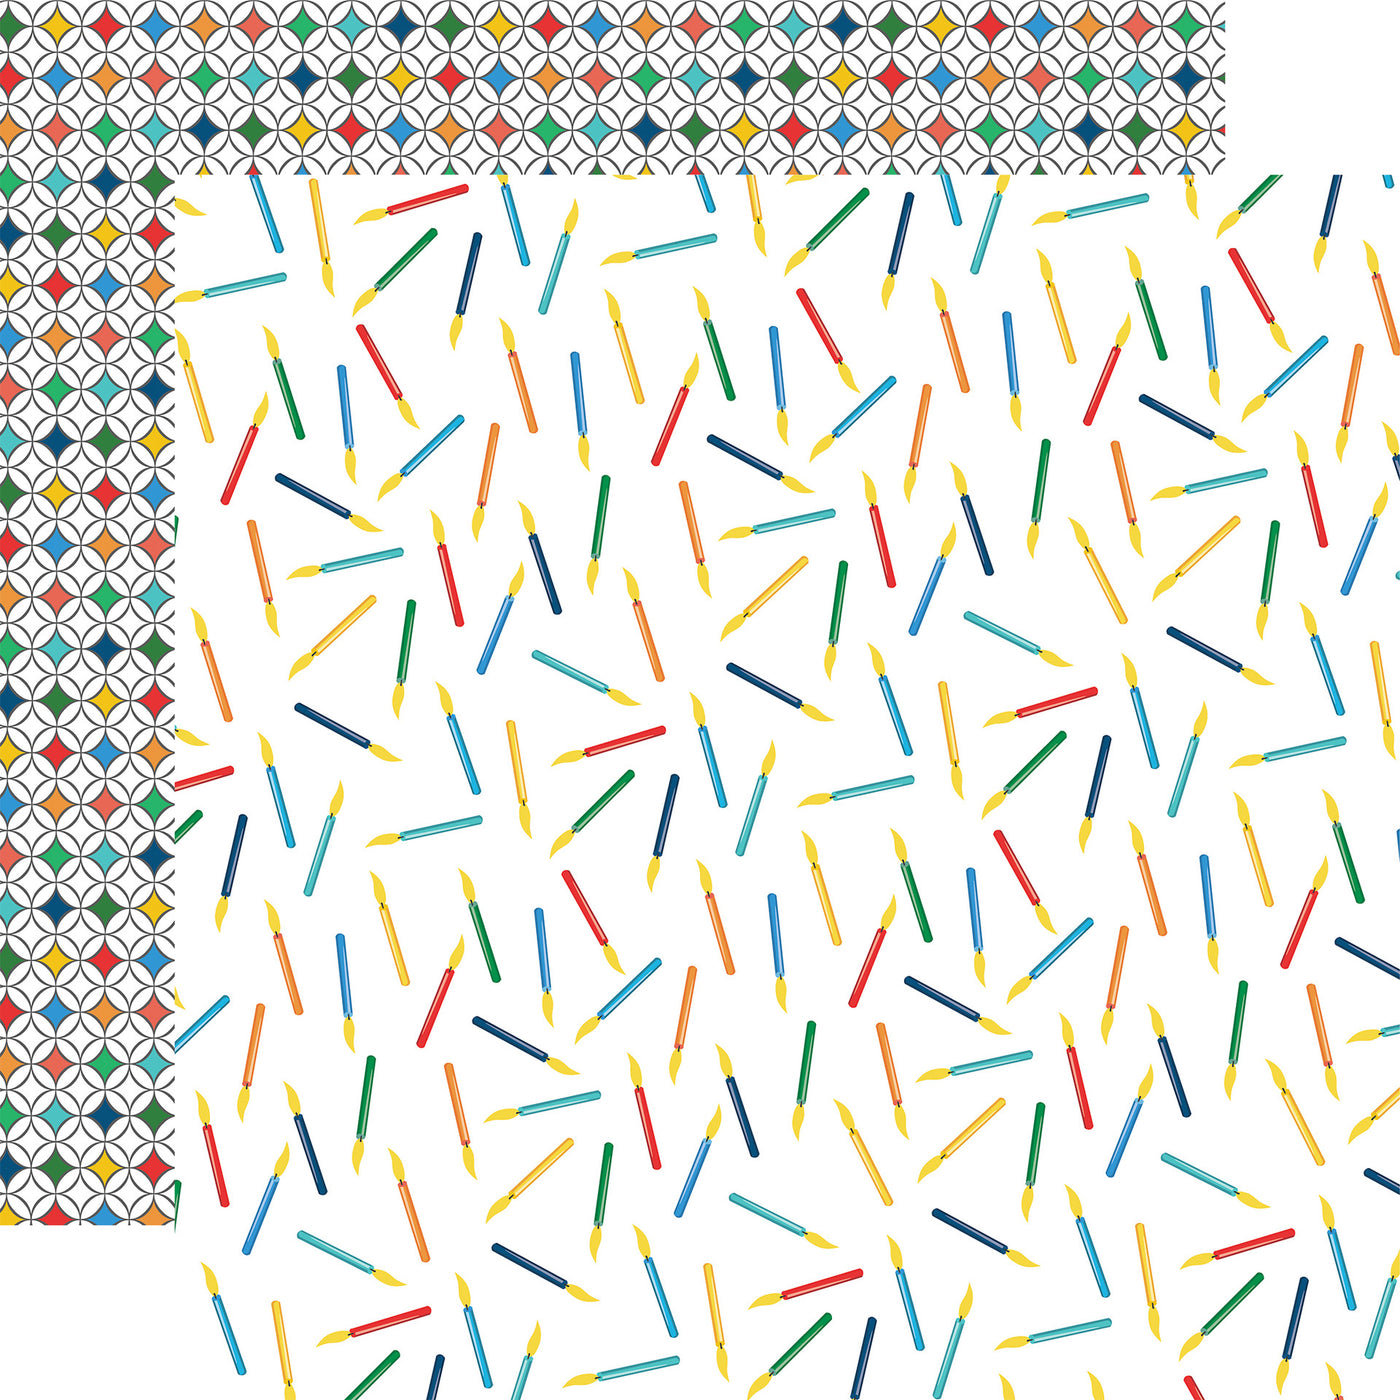 12x12 double-sided patterned paper (Side A - birthday candles in red, yellow, blue, and green all over on a white background; Side B - a fun, colorful geometric pattern on a white background) - Carta Bella.